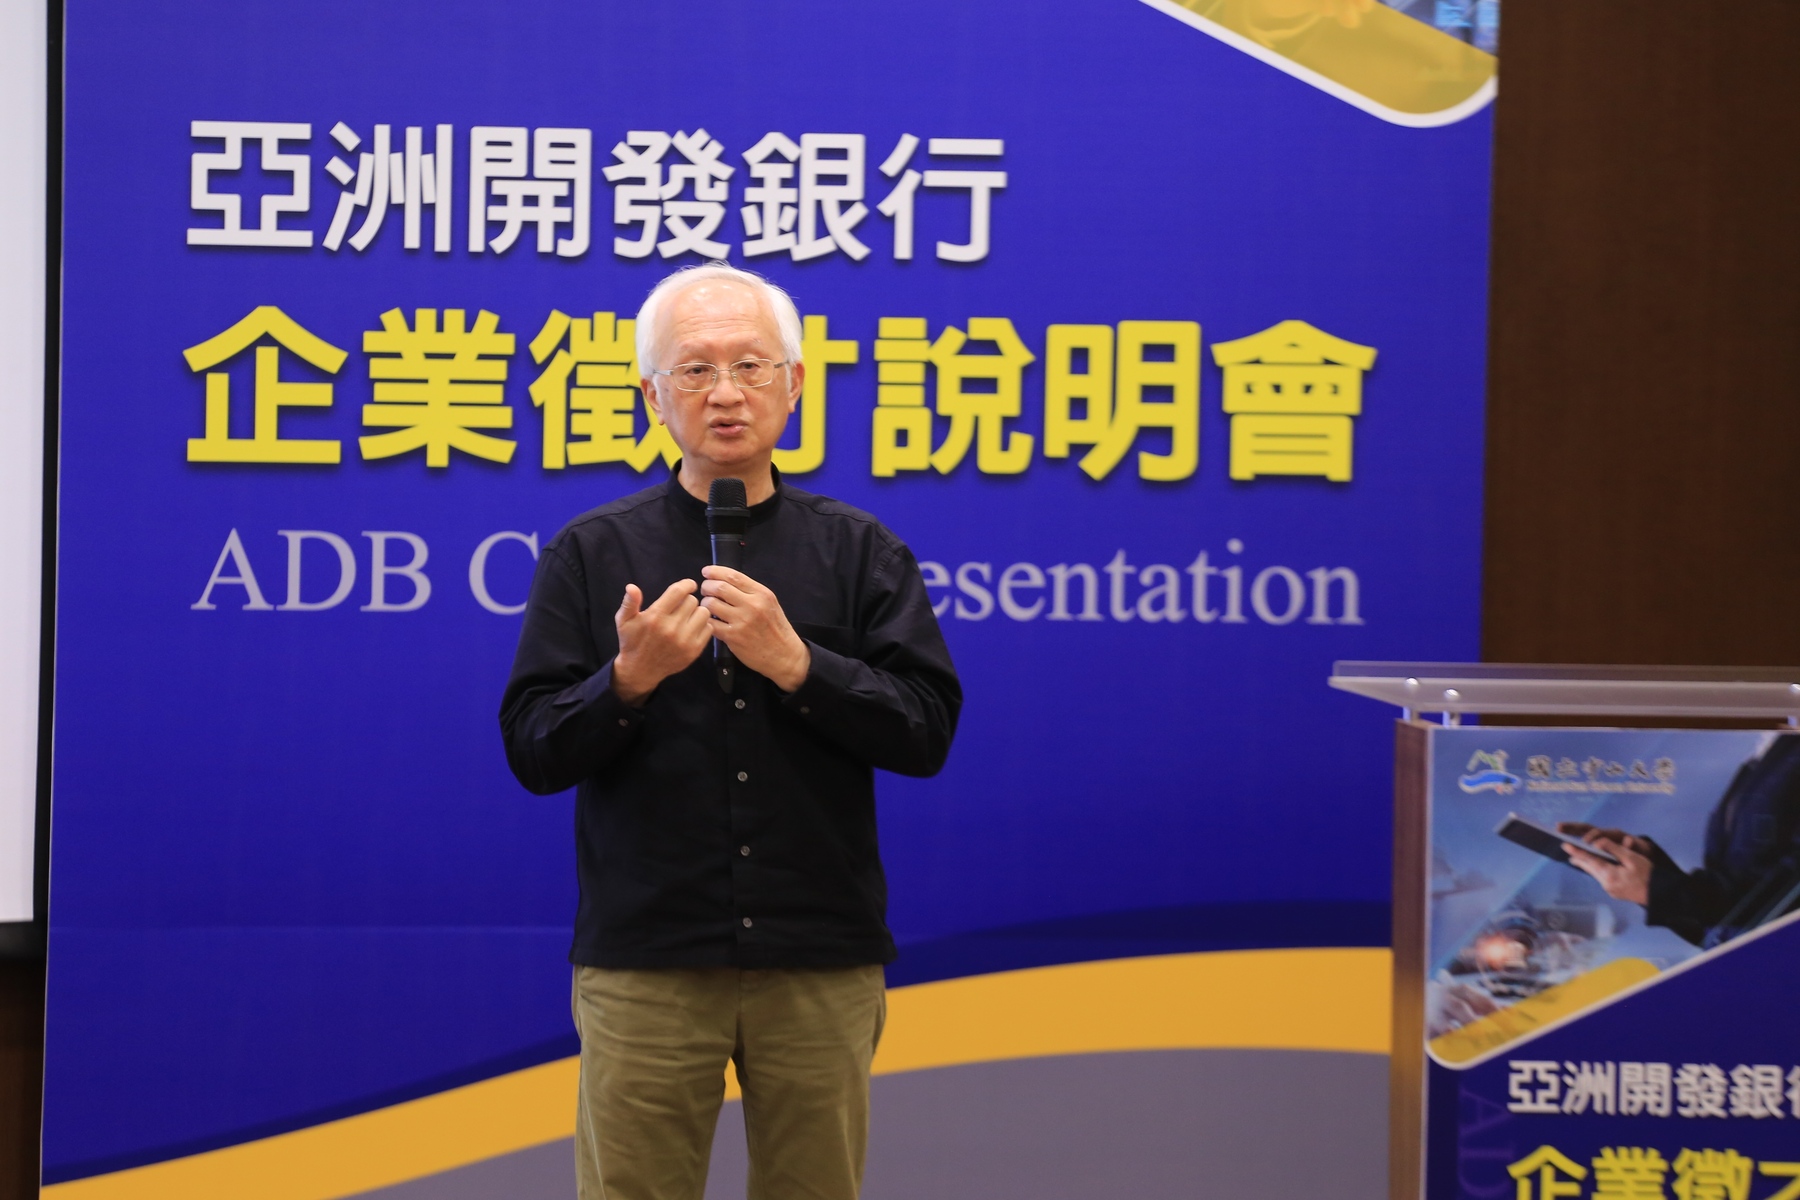 Ray DAWN, Dean of SBF stated that ADB’s human resource specialists comprehensively specified the company’s recruitment programs and related qualifications, providing guidance for all special talents from south Taiwan aiming to work at multinational corporations.